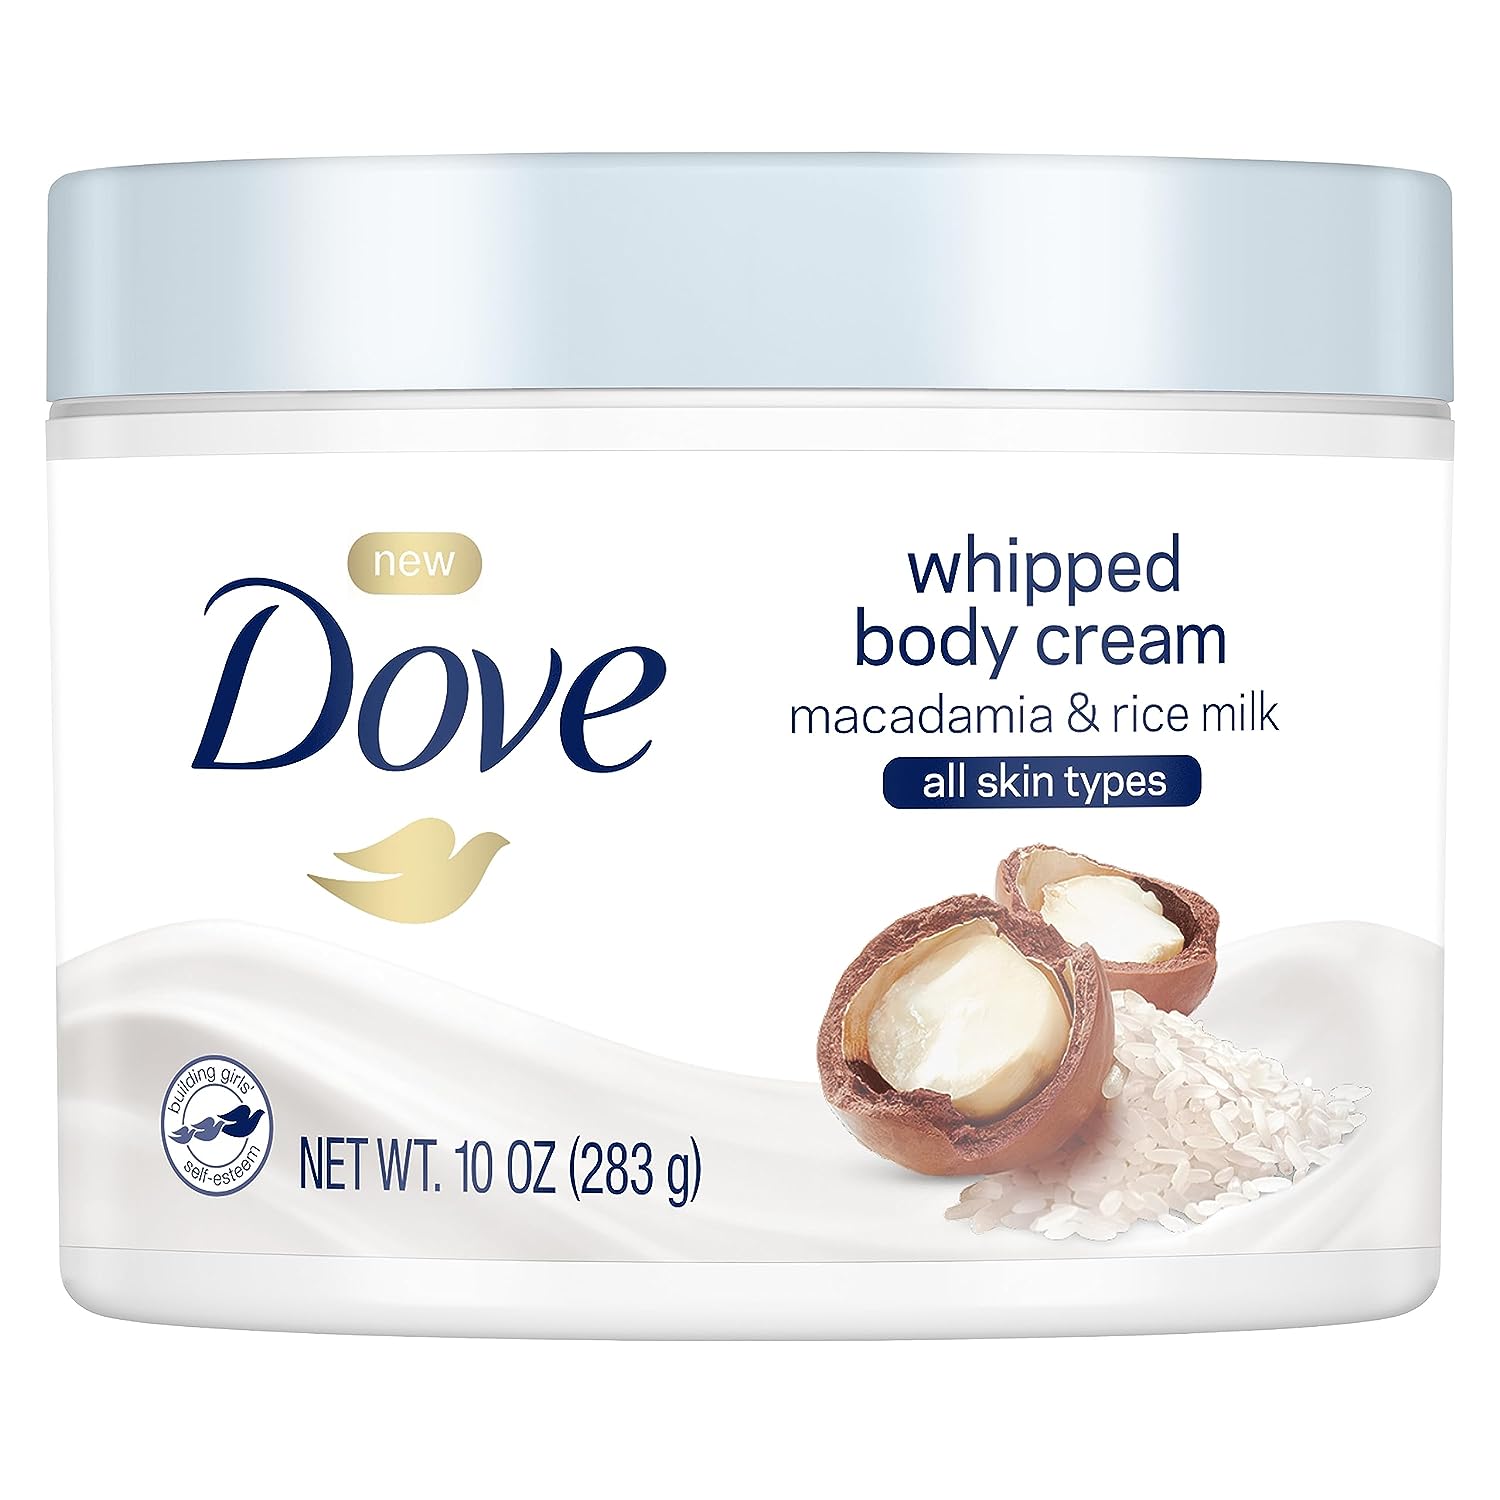 Body Butter Buying Guide, Best Body Butter